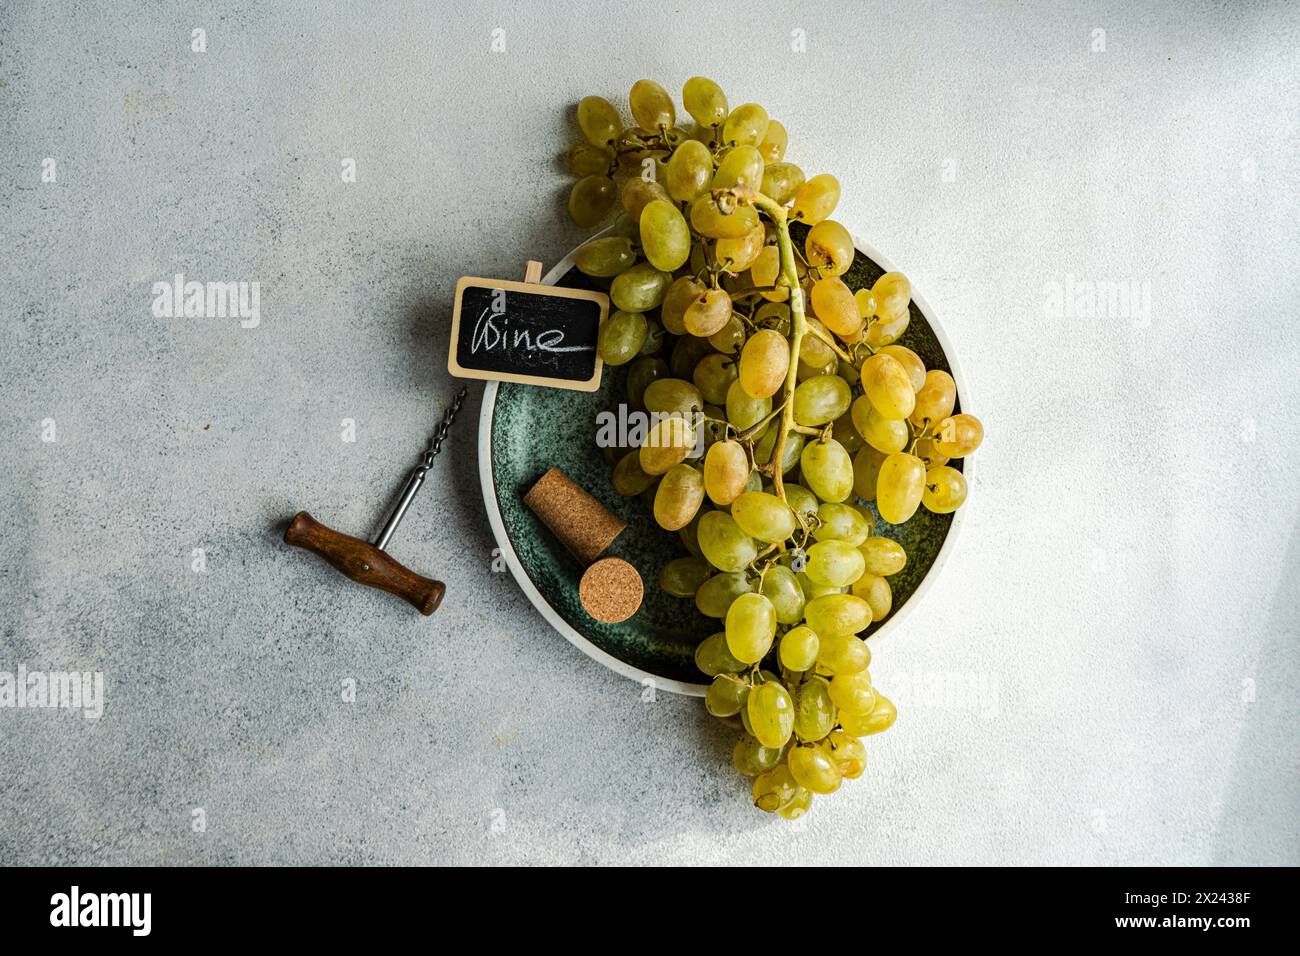 Ripe grapes on the vine on a plate Stock Photo